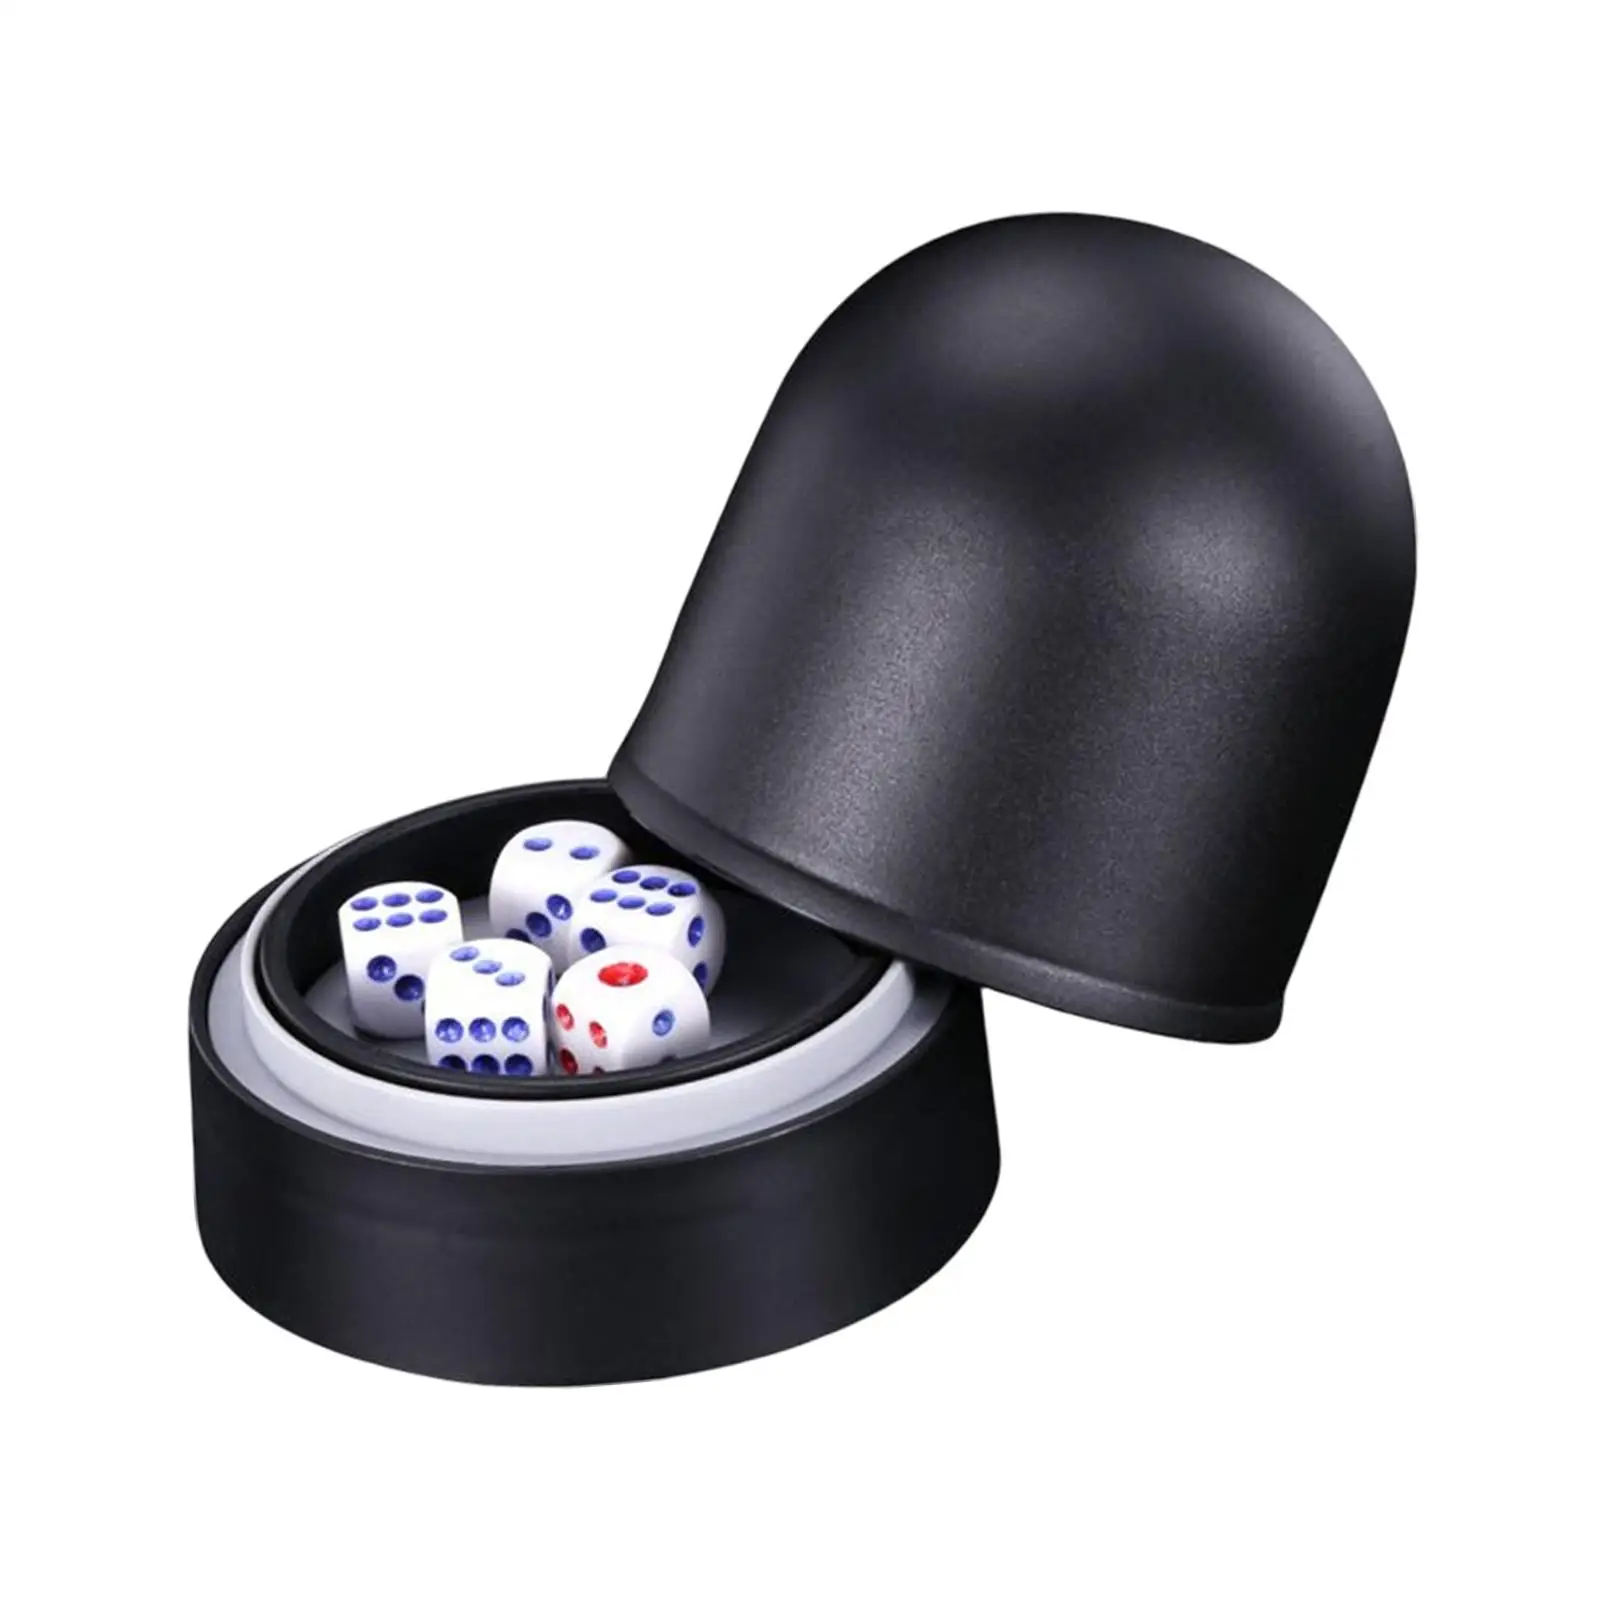 Dice Cup Upgraded Press dices game Space Saving with 5 Dice Bar Dice for Bar Party